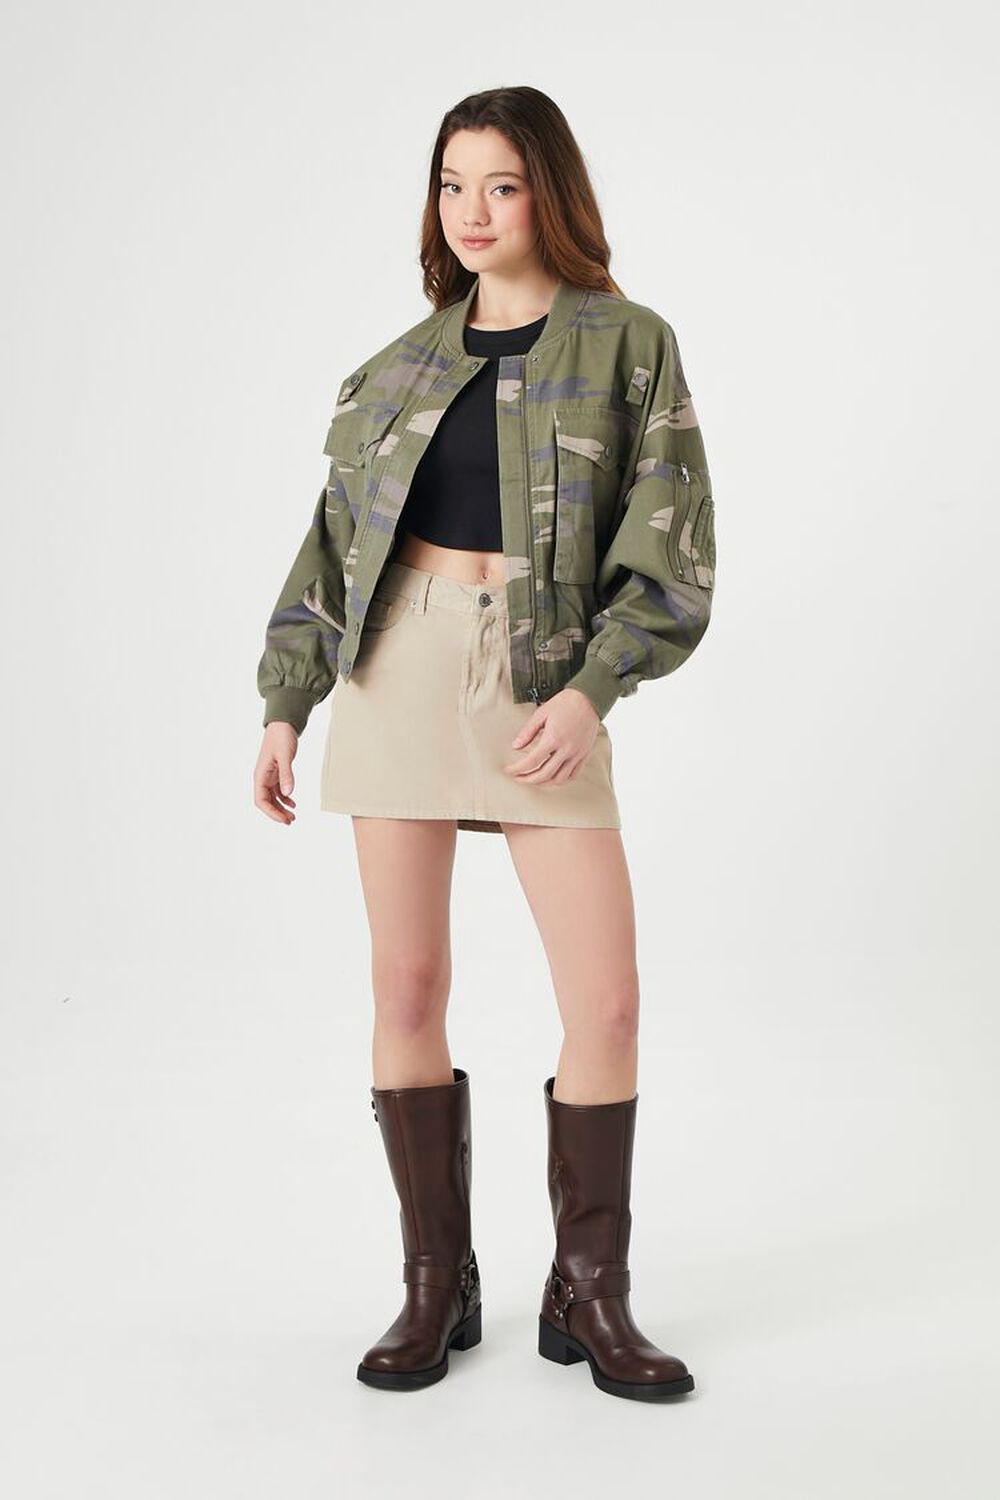 Fashion-forward Camo Print Jacket by Forever 21